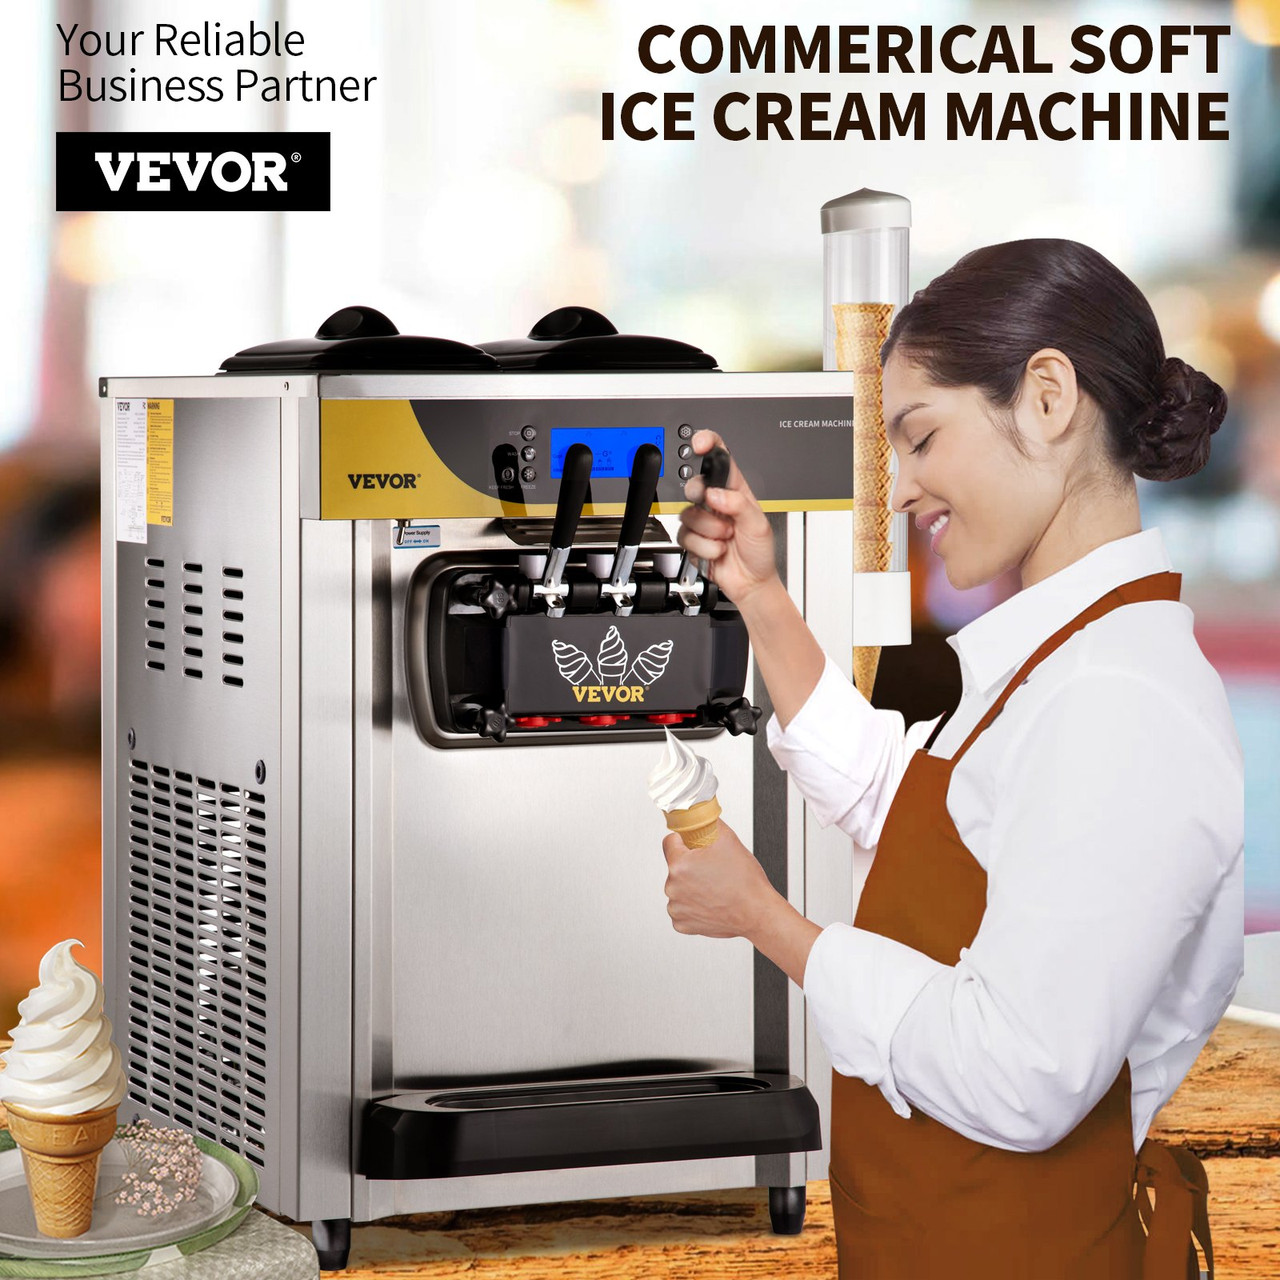 Commercial Ice Cream Maker, 22-30L/H Yield, 2200W Countertop Soft Serve Machine w/ 2x6L Hopper 2L Cylinder LCD Panel Puffing Shortage Alarm, Frozen Yogurt Maker for Restaurant Snack Bar, Silver